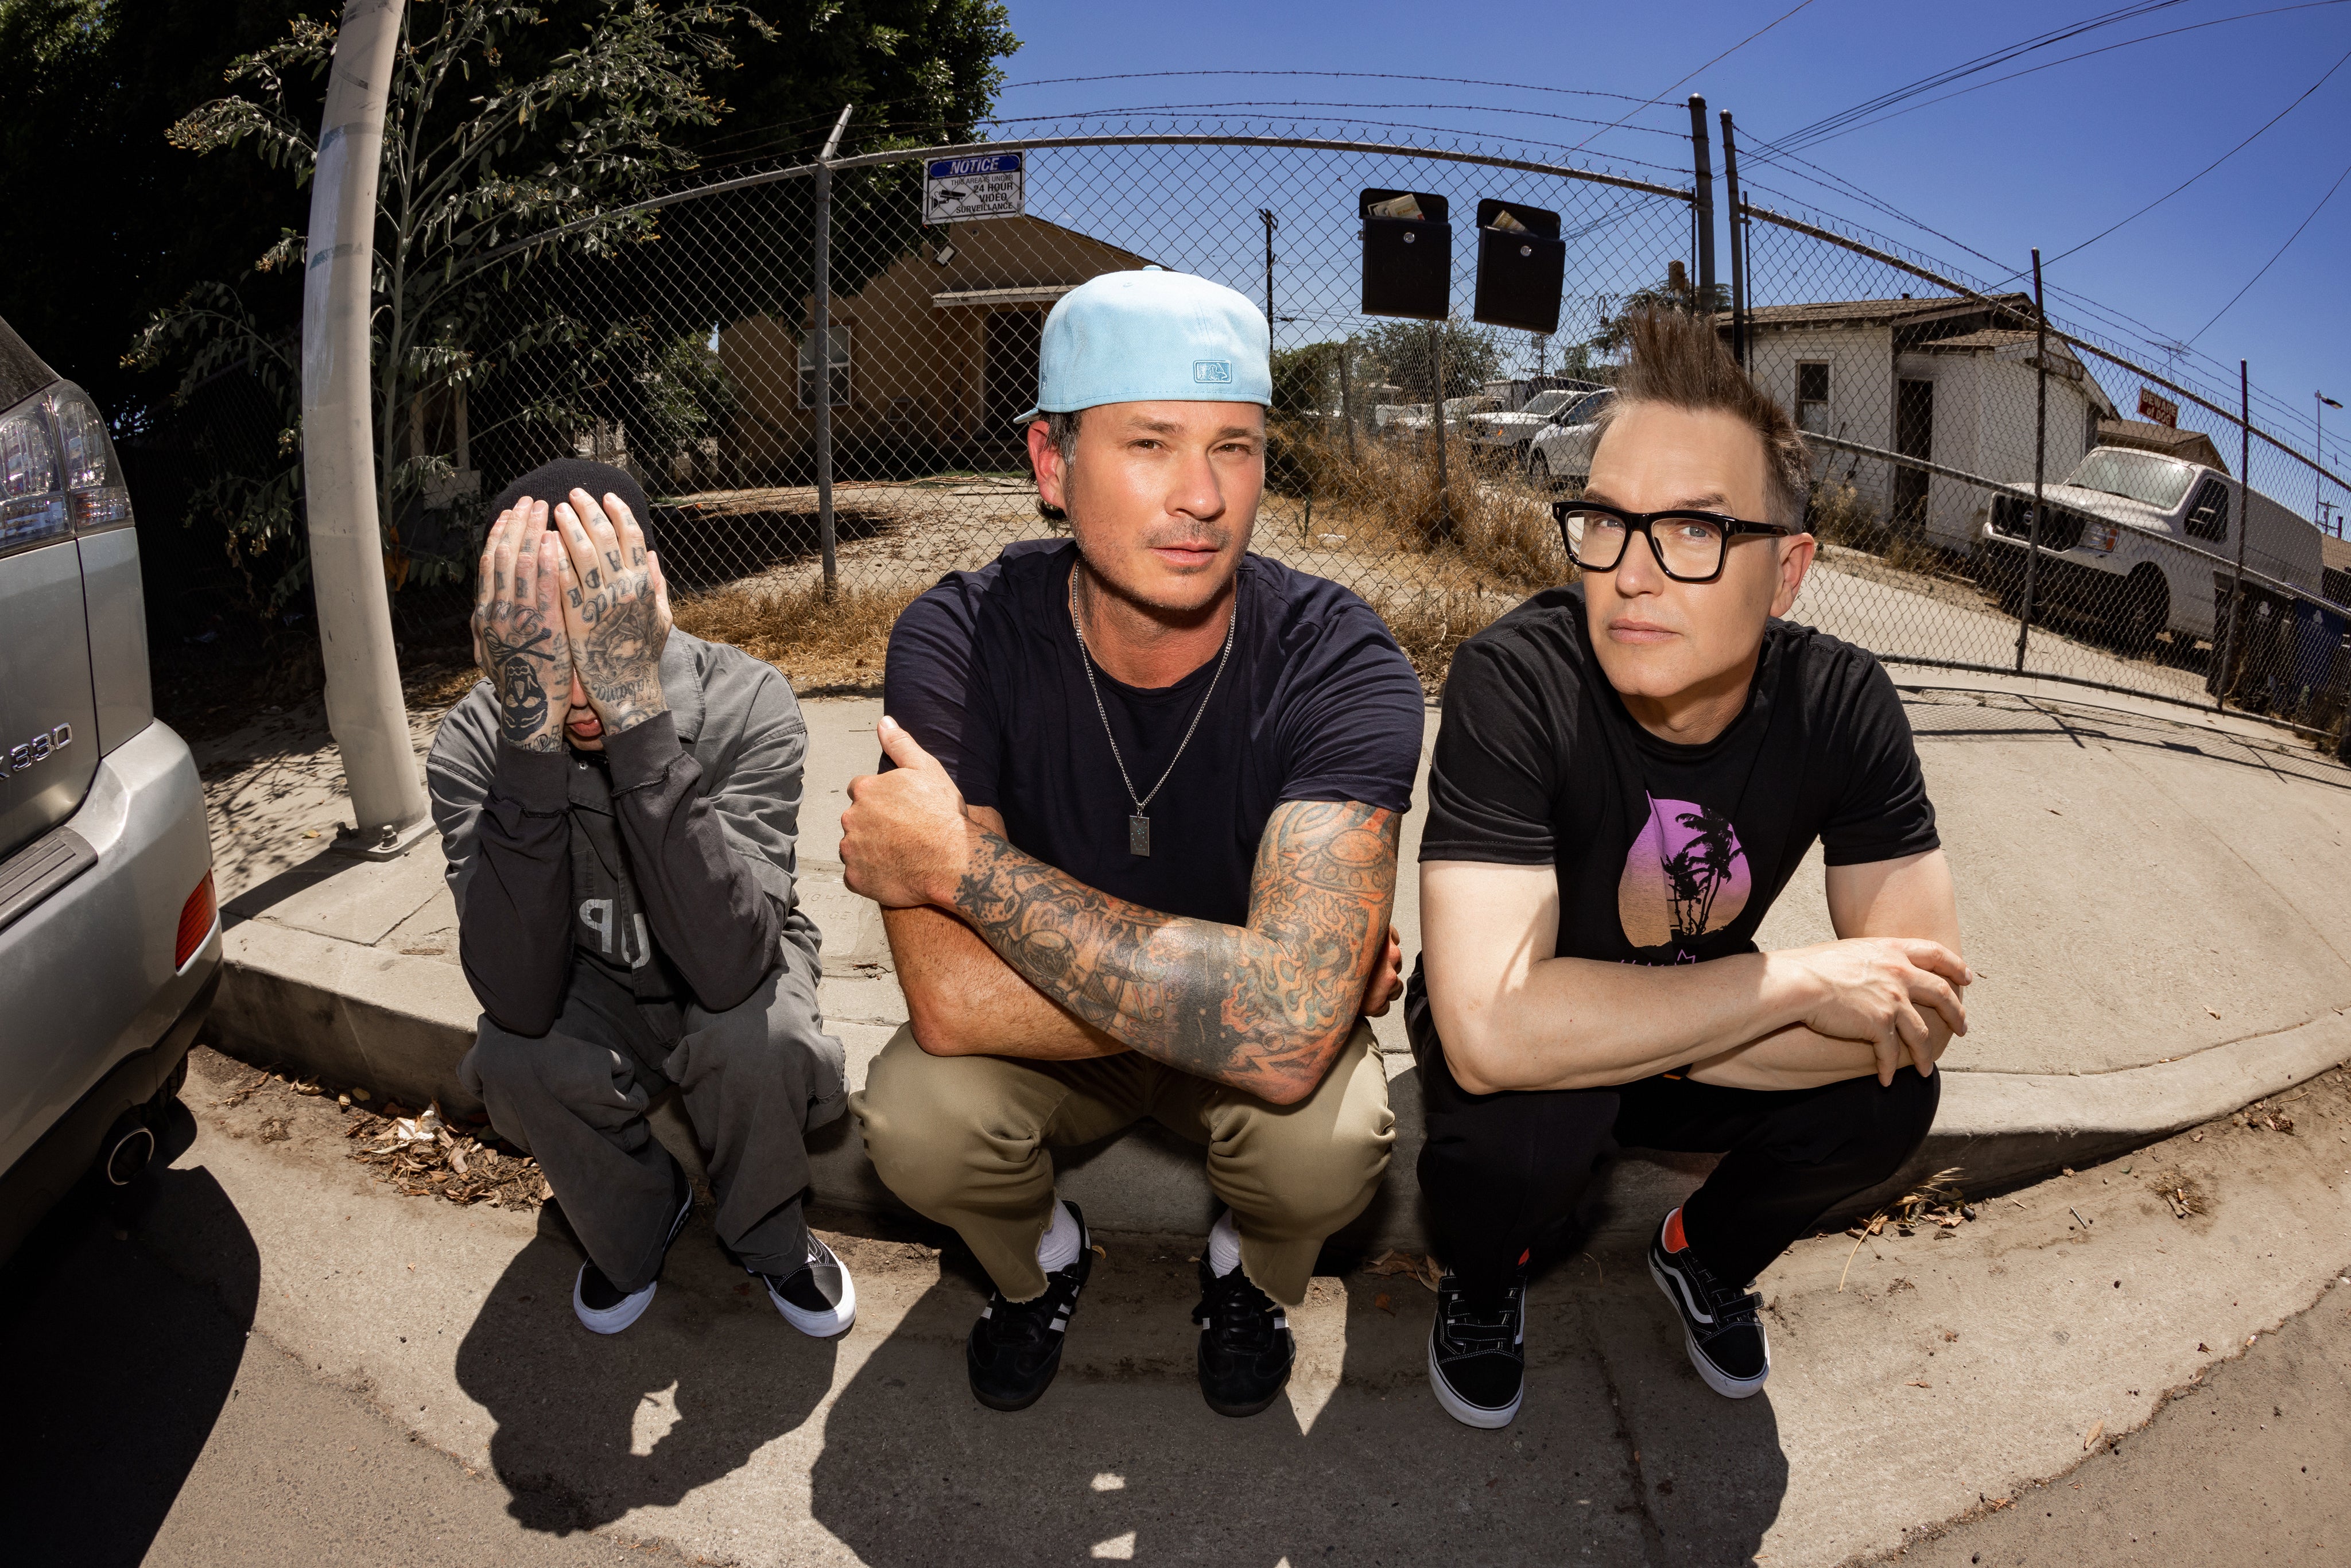 blink-182 - ONE MORE TIME presale code